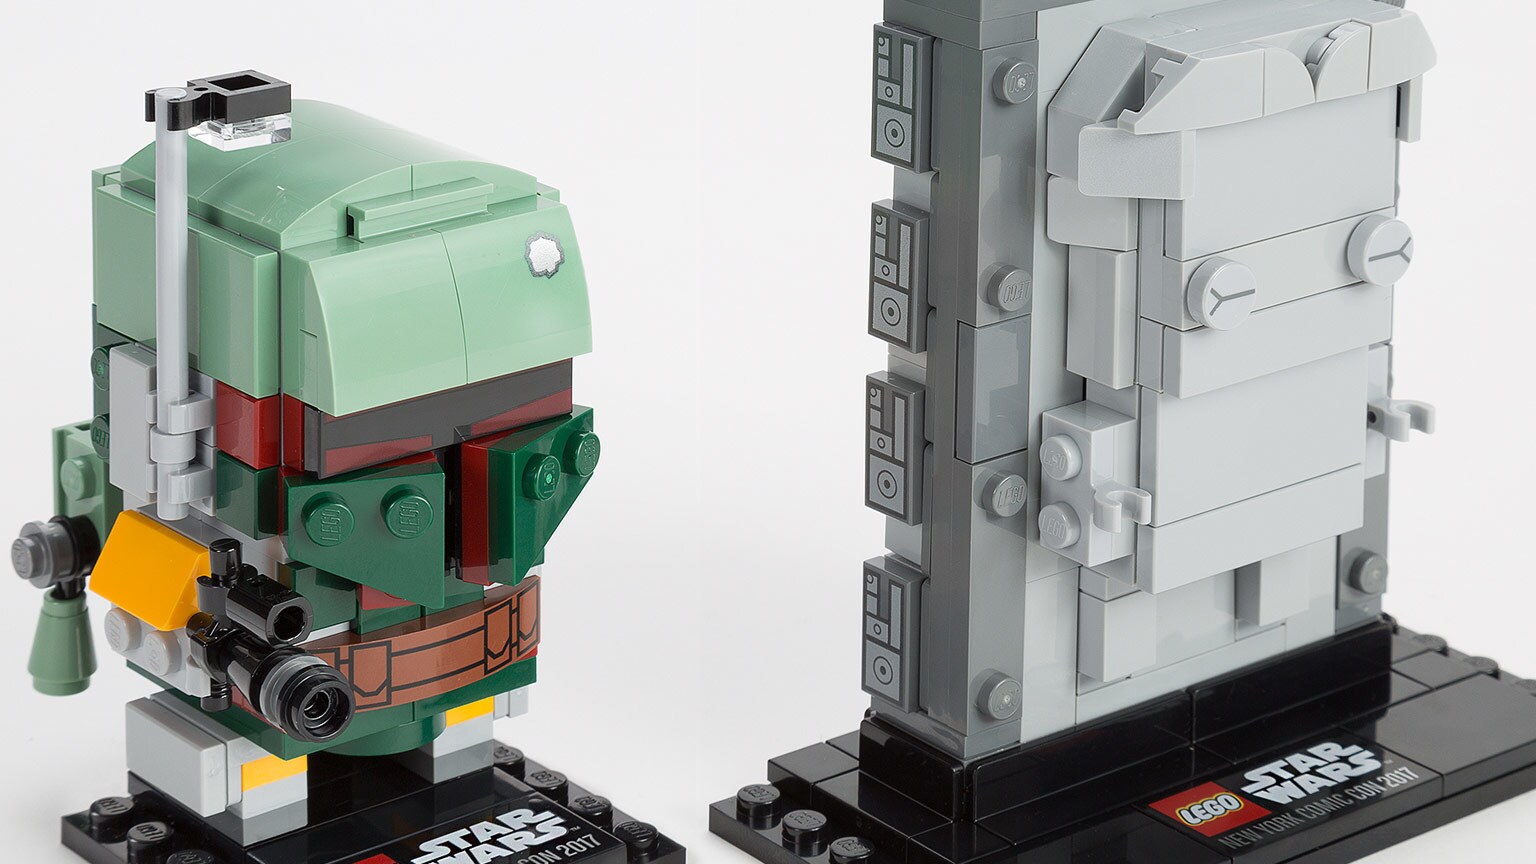 We Love the LEGO Boba Fett and Han Solo in Carbonite BrickHeadz NYCC Exclusive